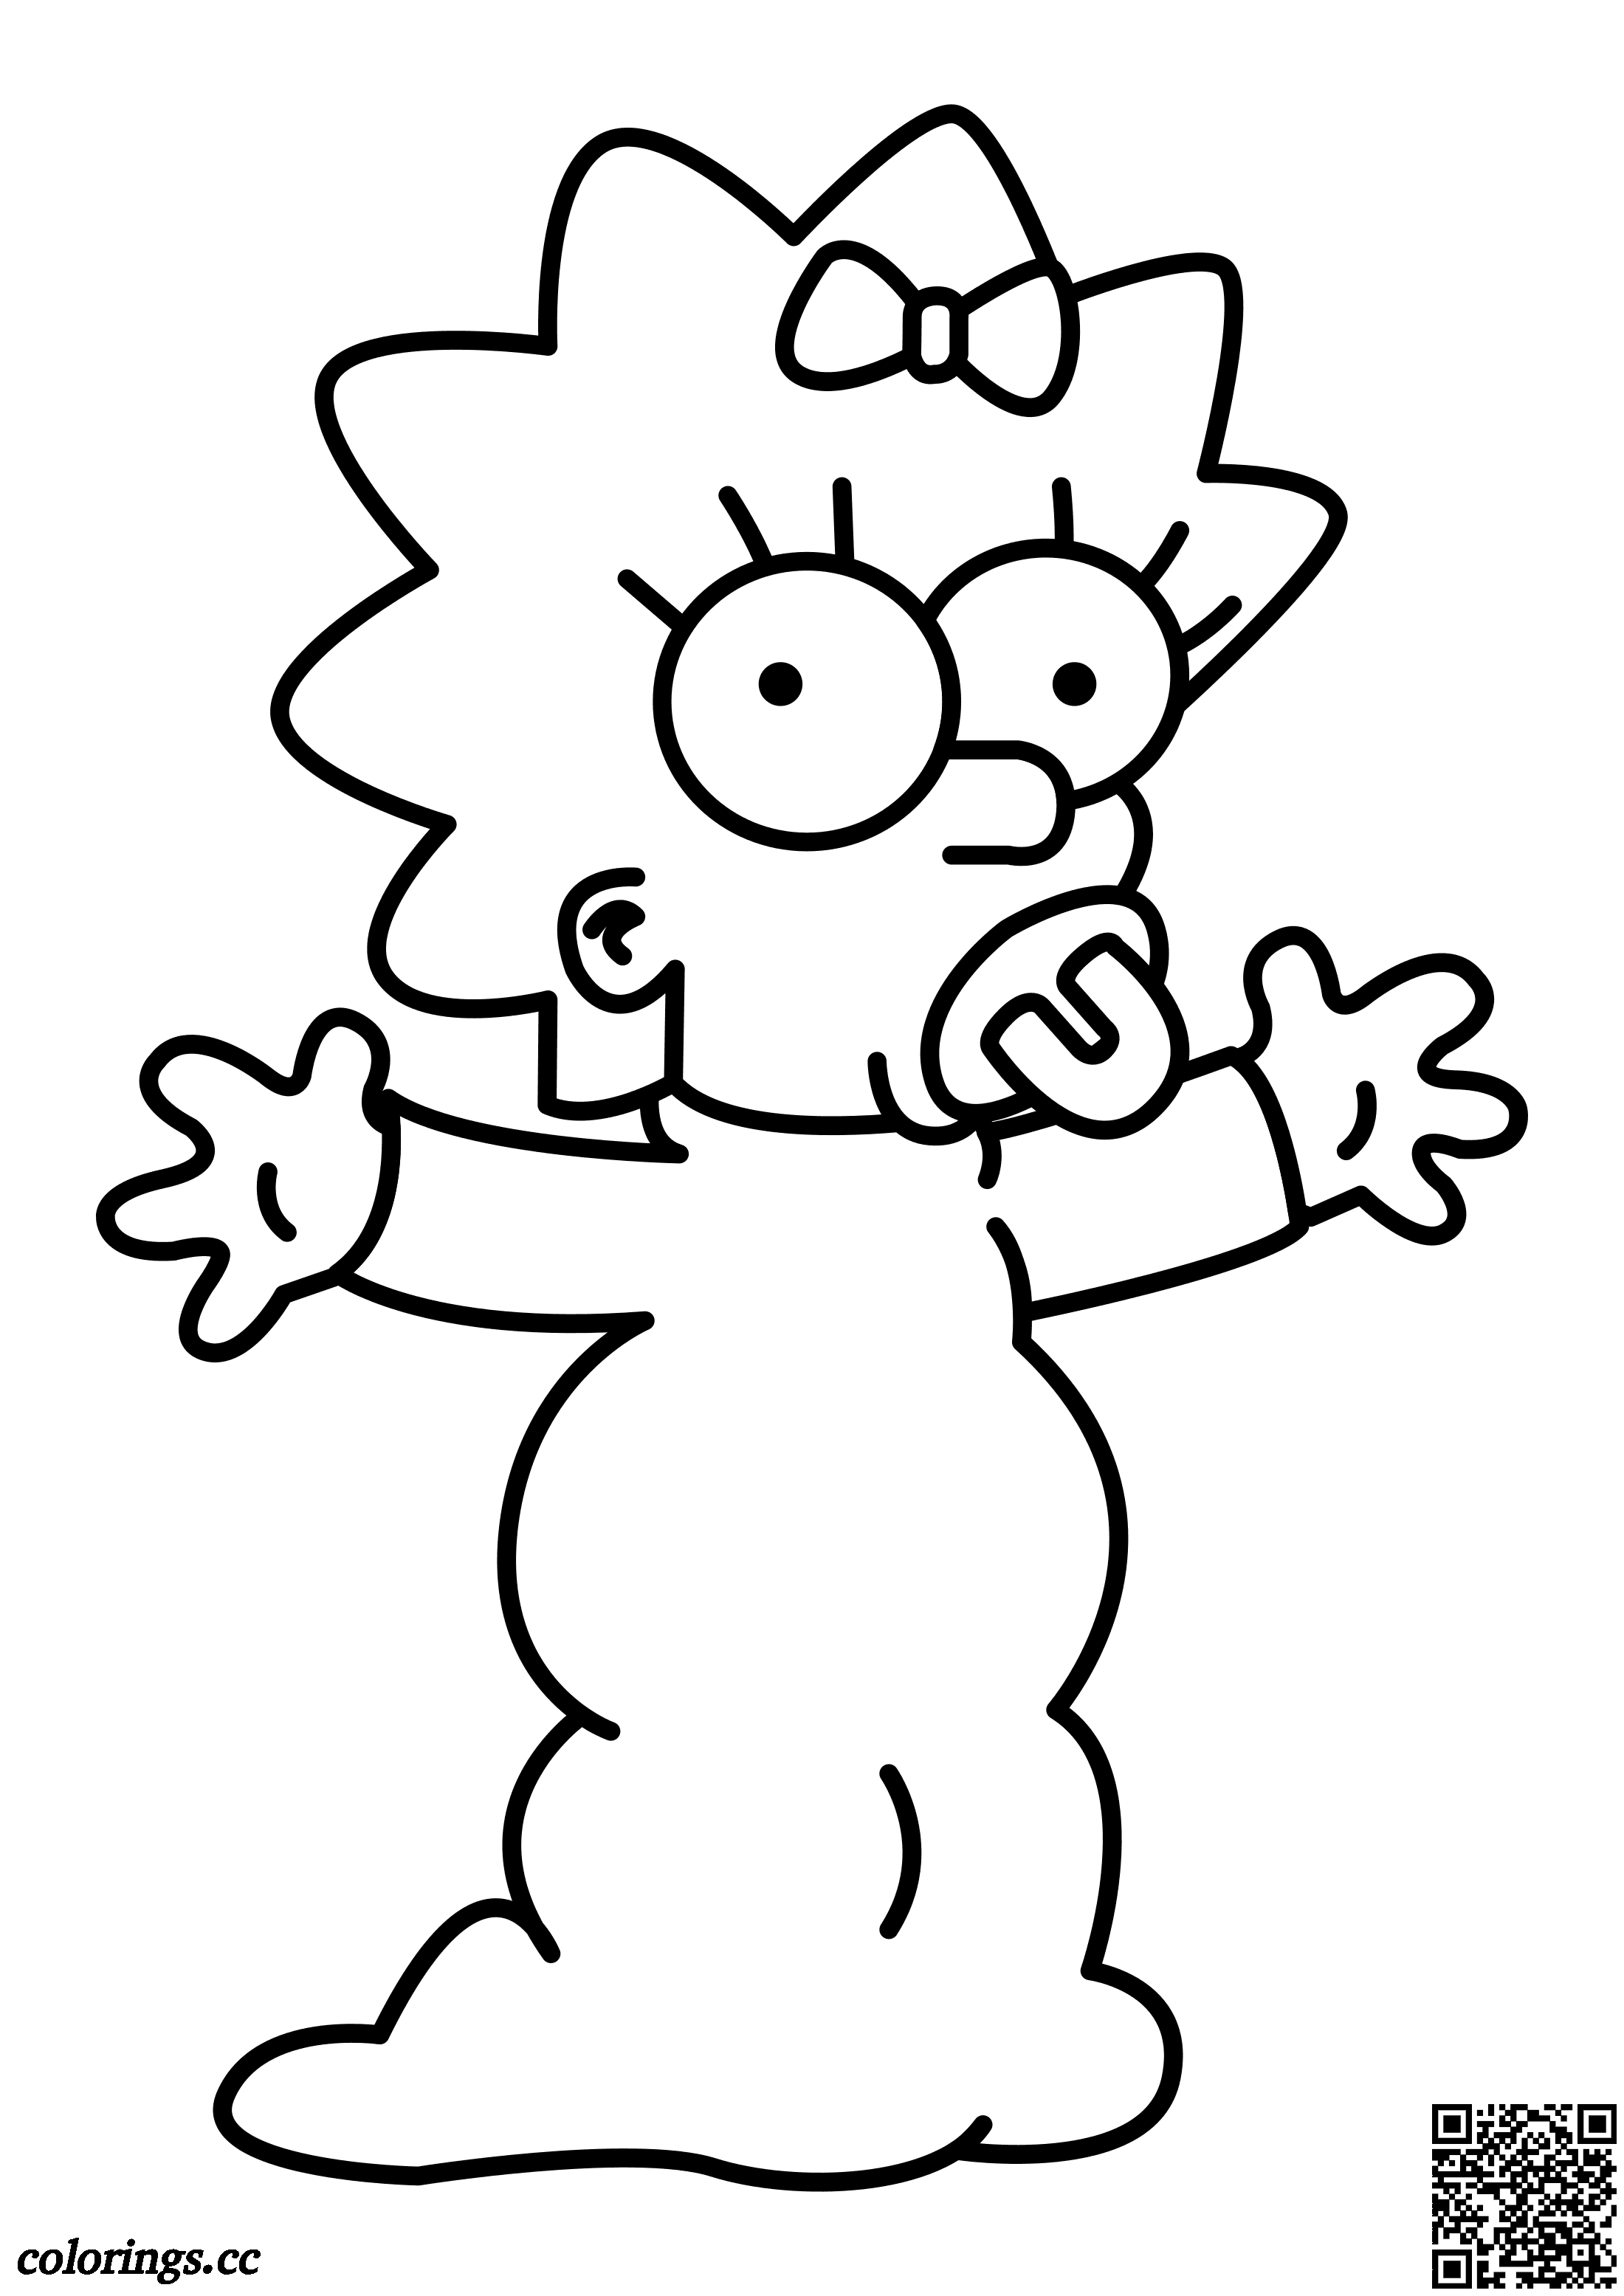 Maggie Simpson coloring pages, The Simpsons coloring pages ...